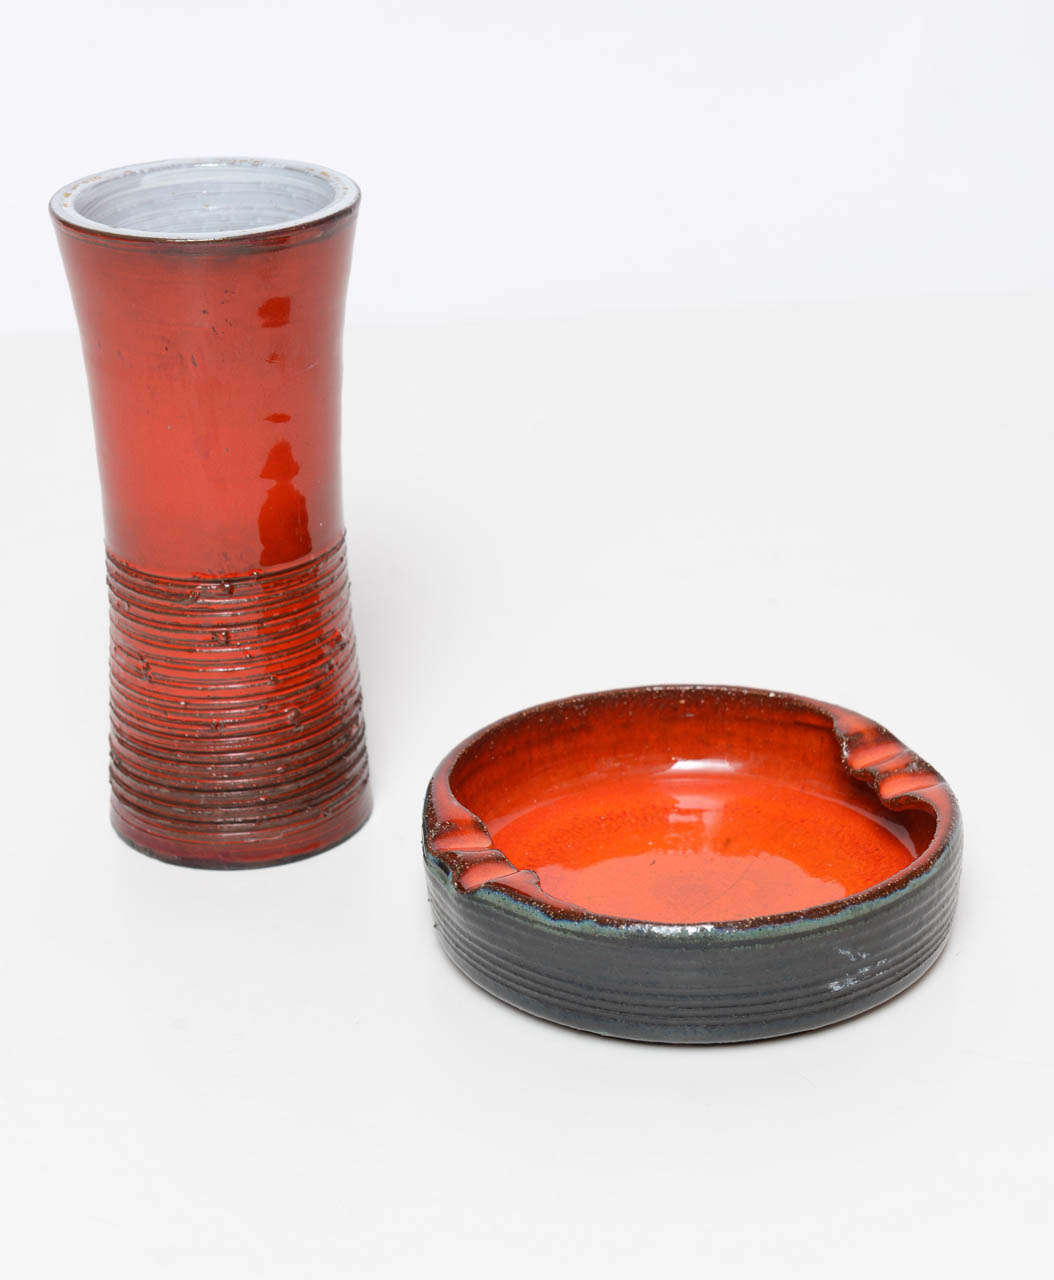 Take your living room back to the latest Mad Men set with these perfect accessories.  Set includes a handmade ceramic cylindrical vase in orange red and black.  Round out the retro look with a  matching hand-finished ashtray in the same color. Vase